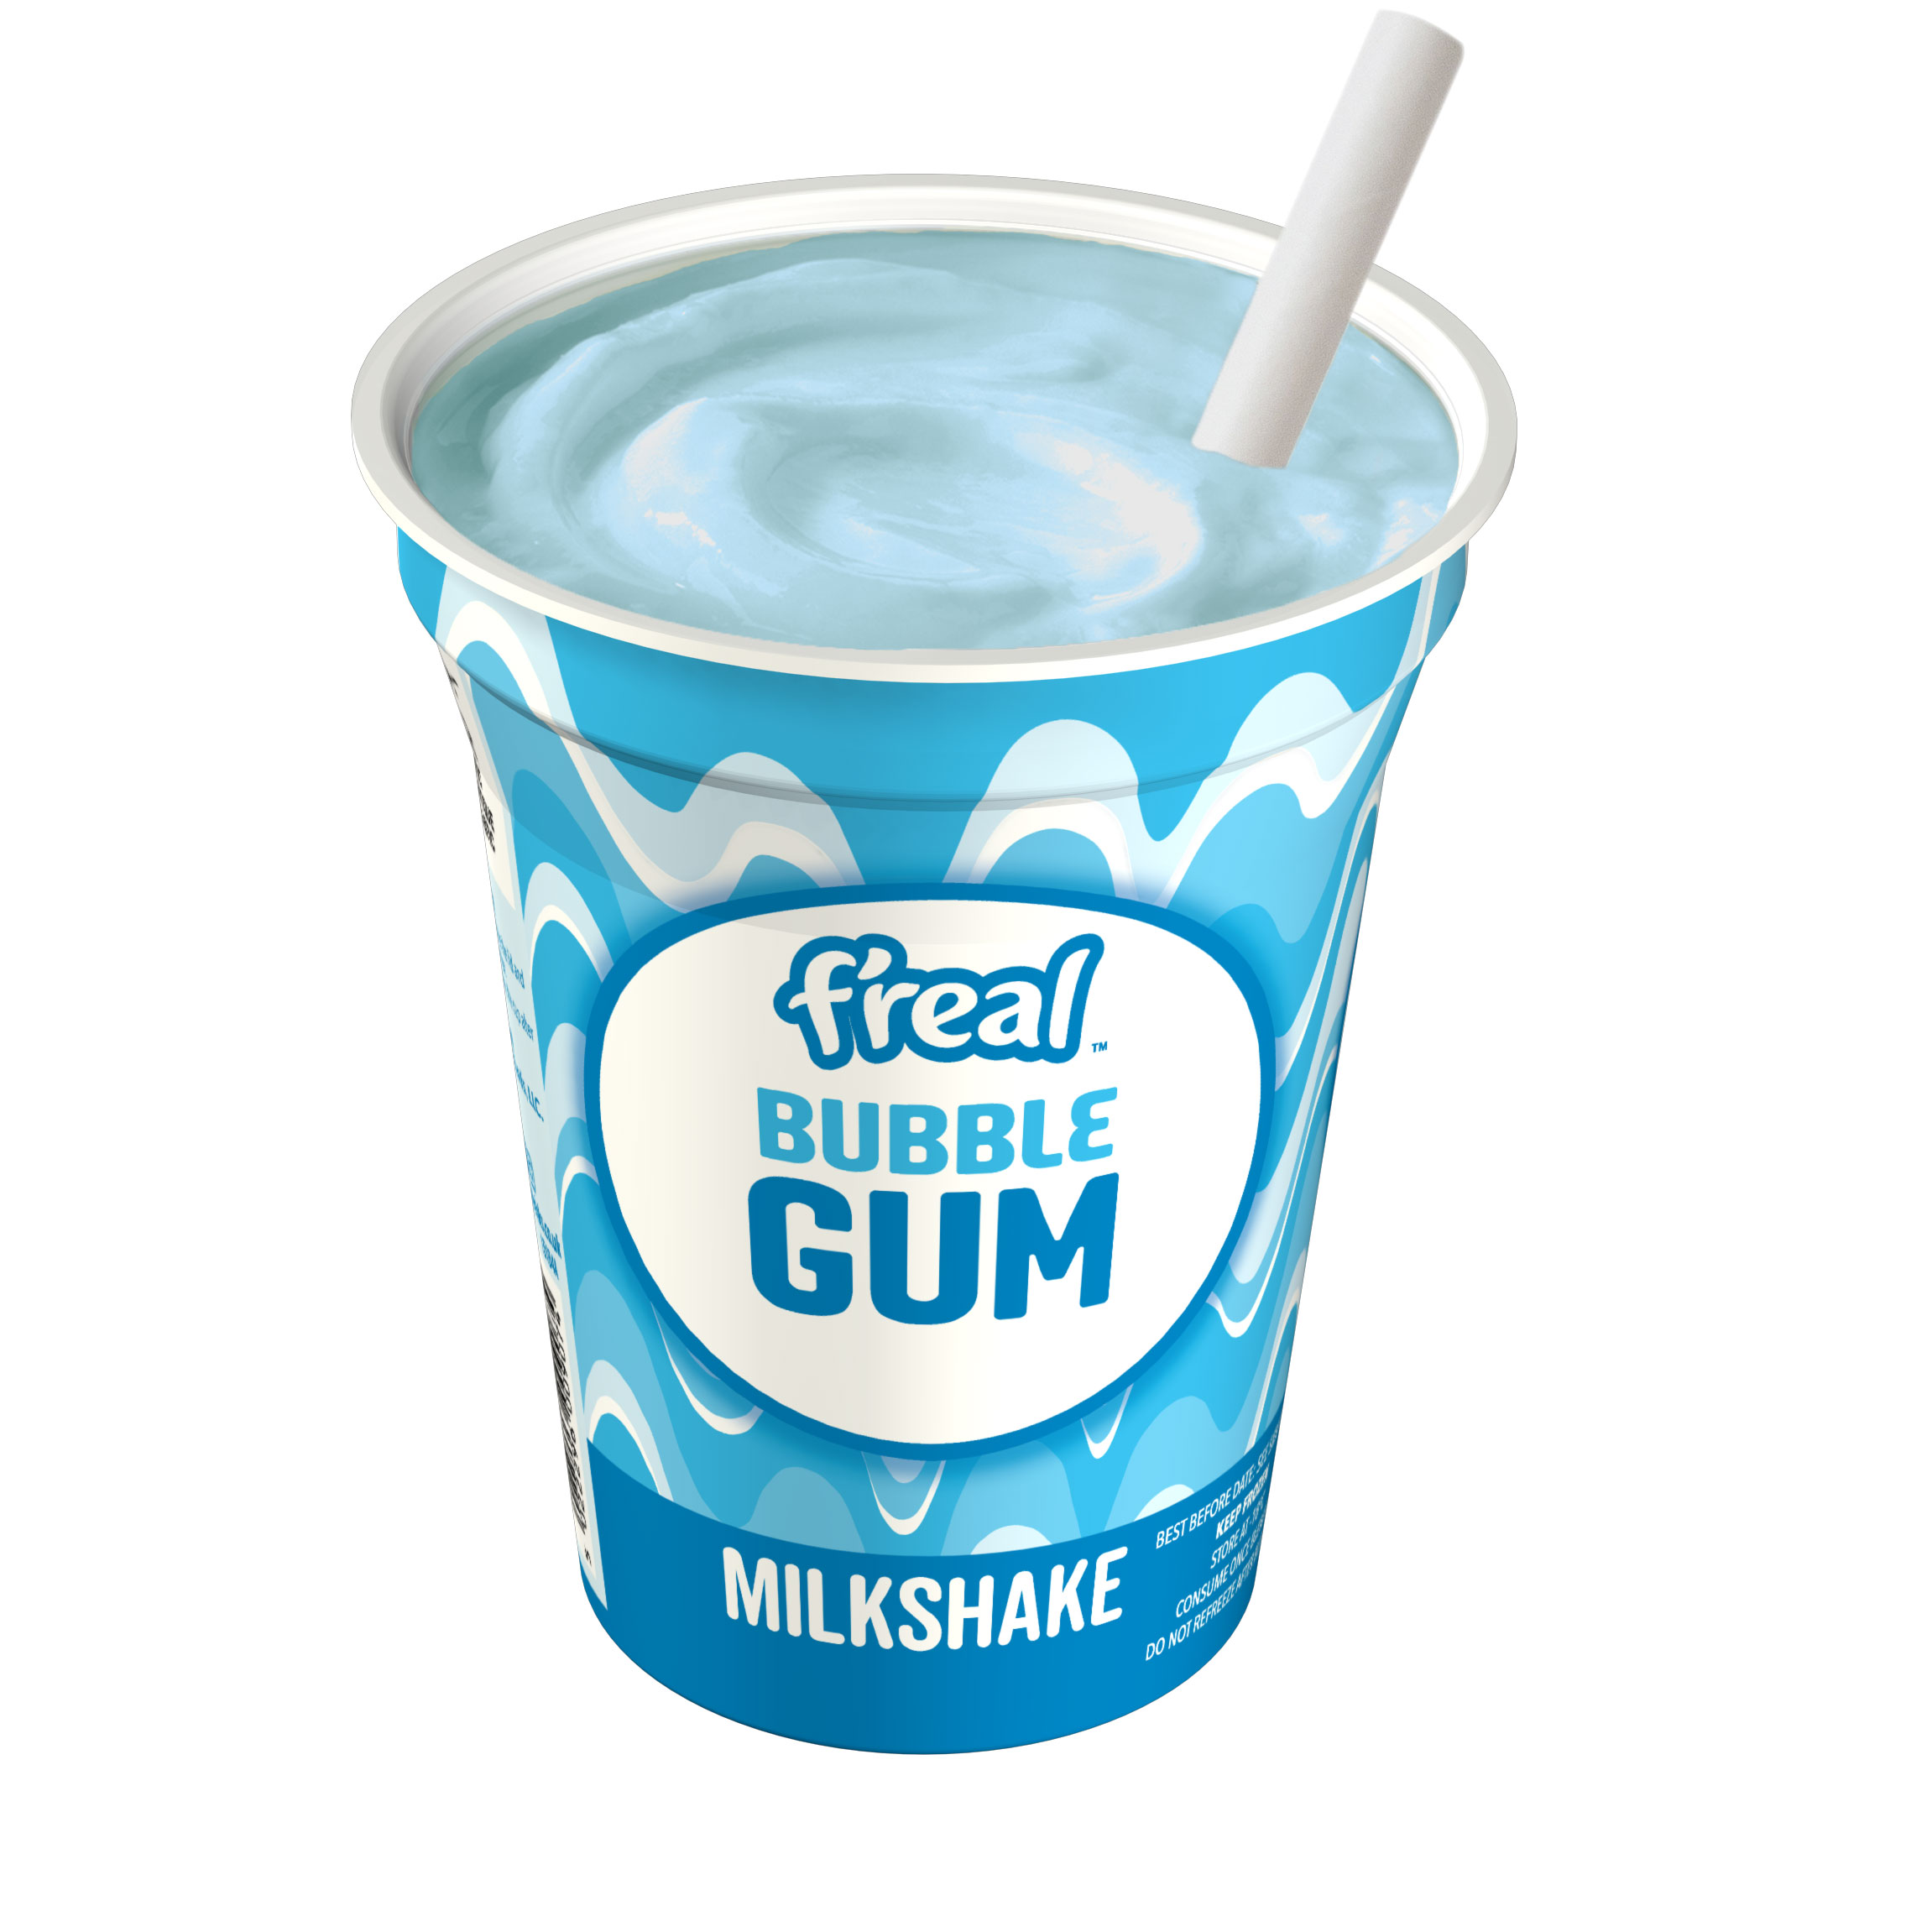 f’real launches bubblegum flavour as UK exclusive